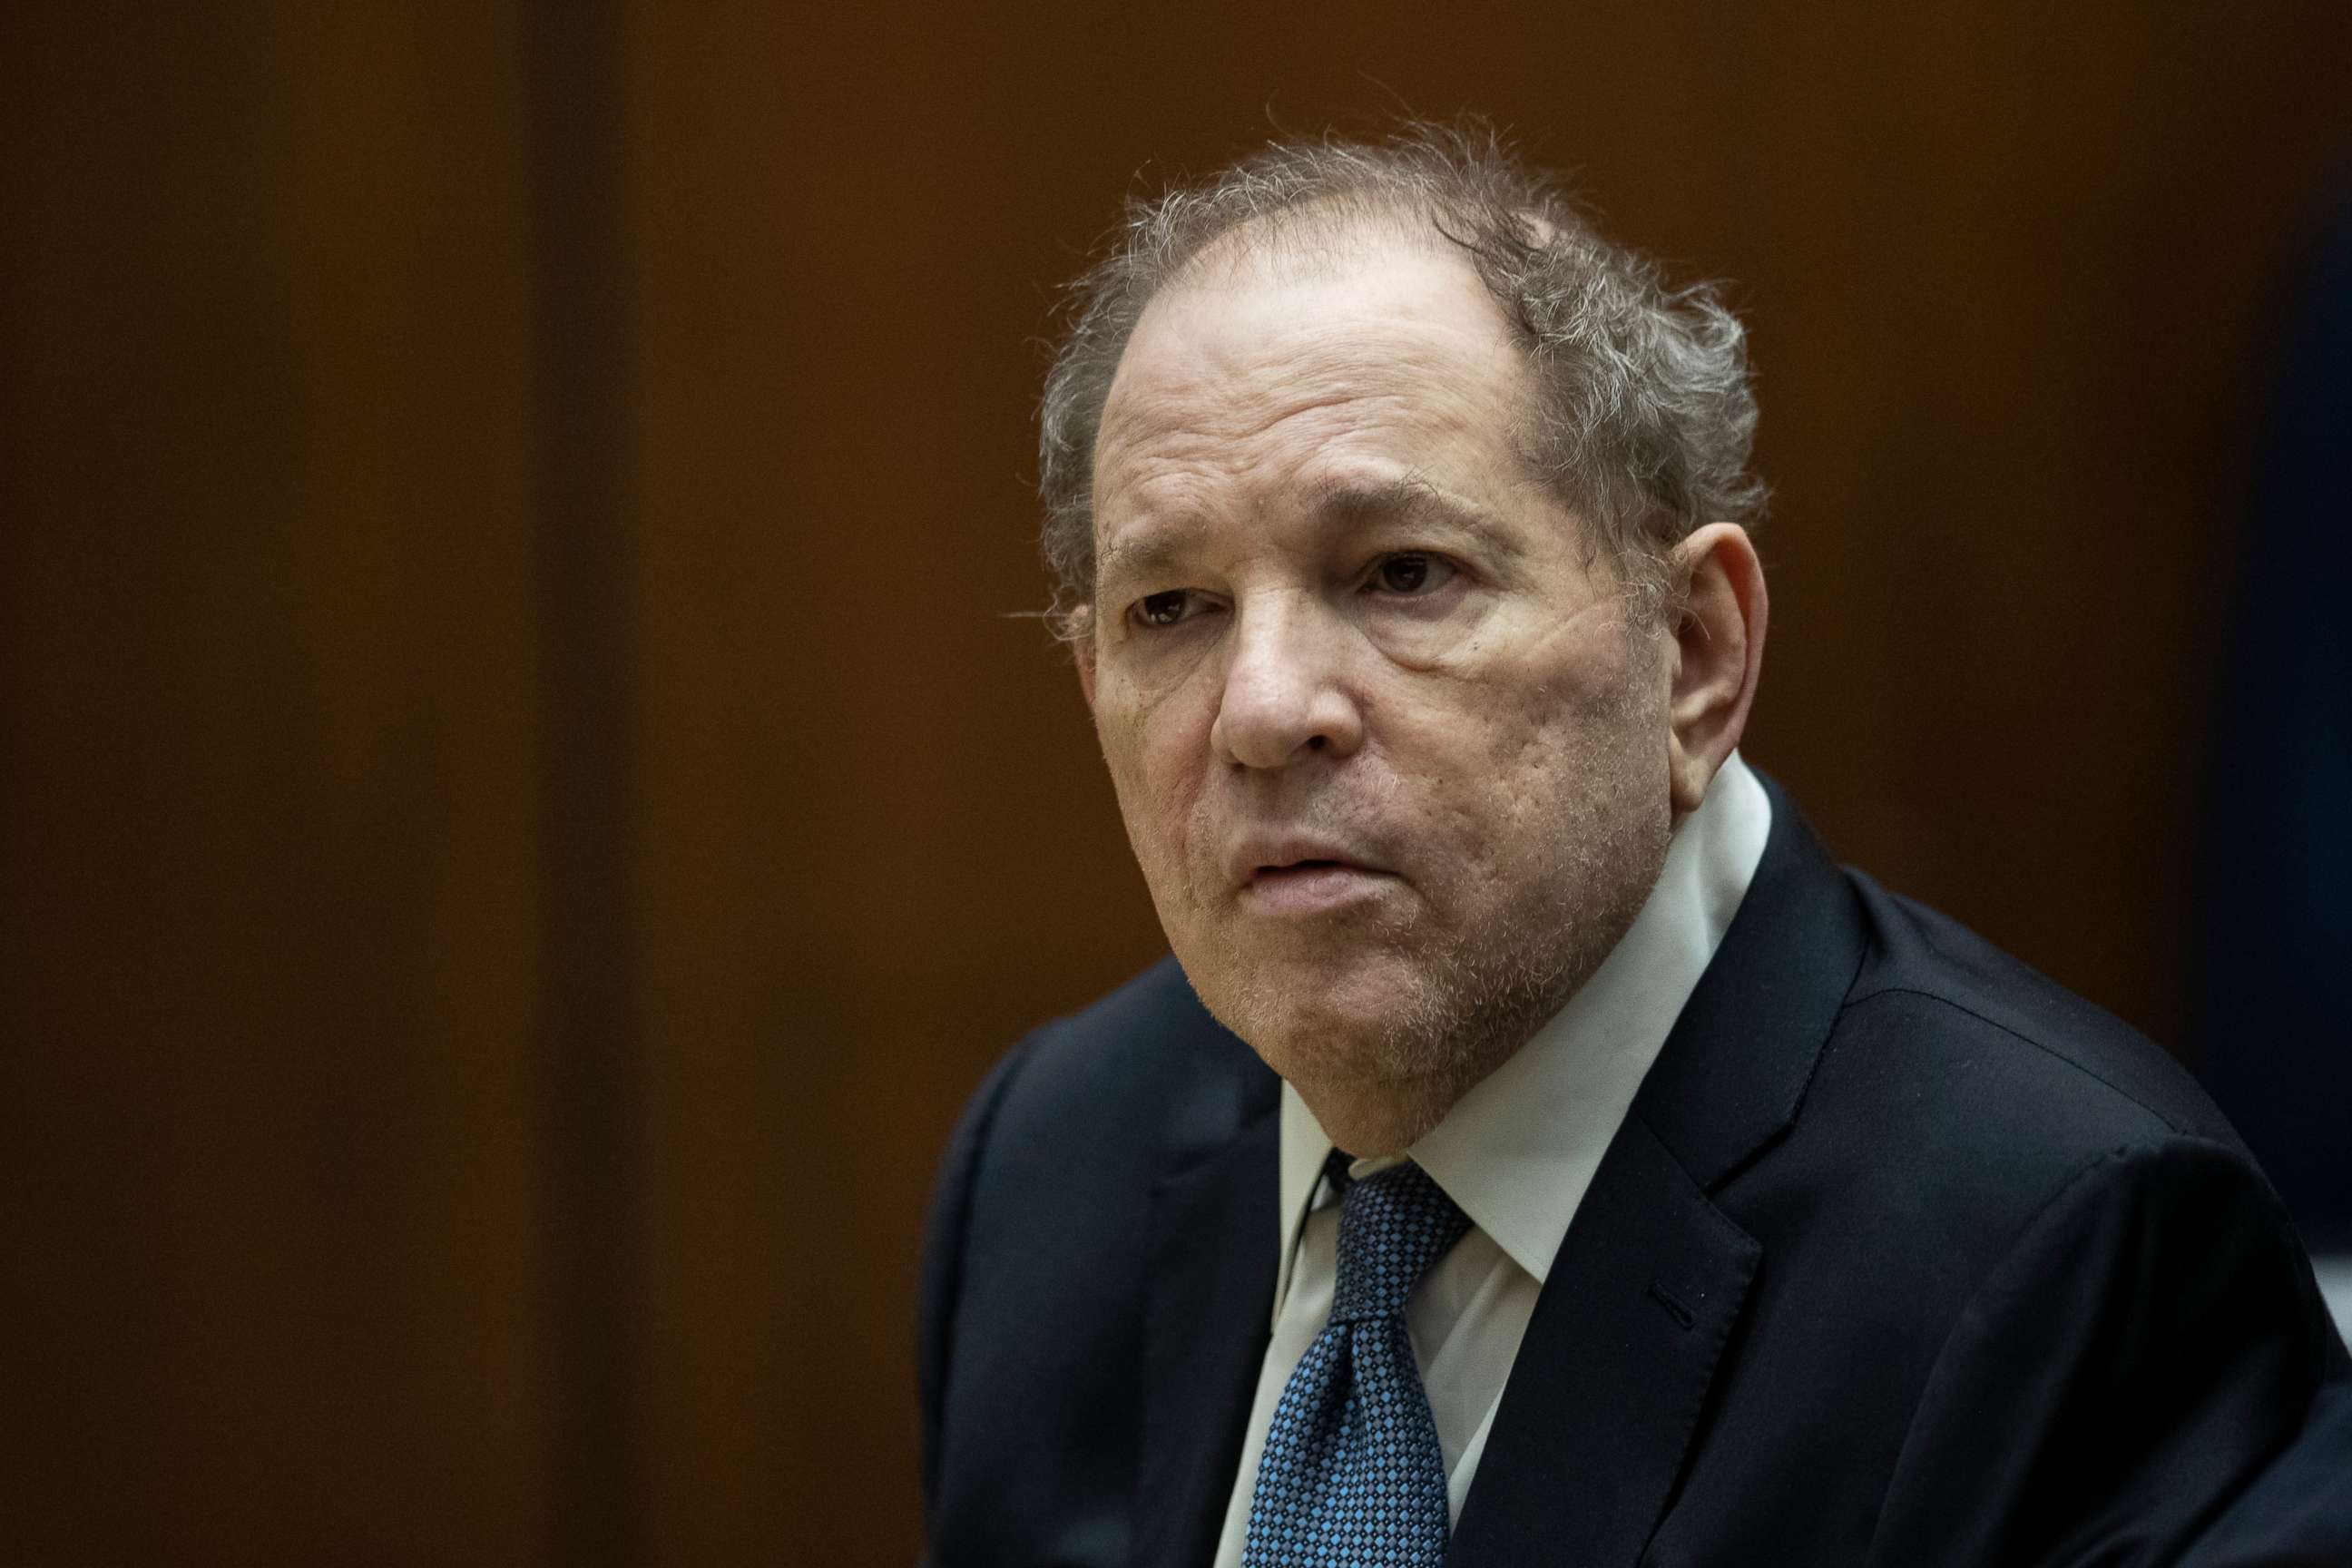 PHOTO: In this Oct. 4, 2022, file photo, former film producer Harvey Weinstein appears in court at the Clara Shortridge Foltz Criminal Justice Center in Los Angeles.